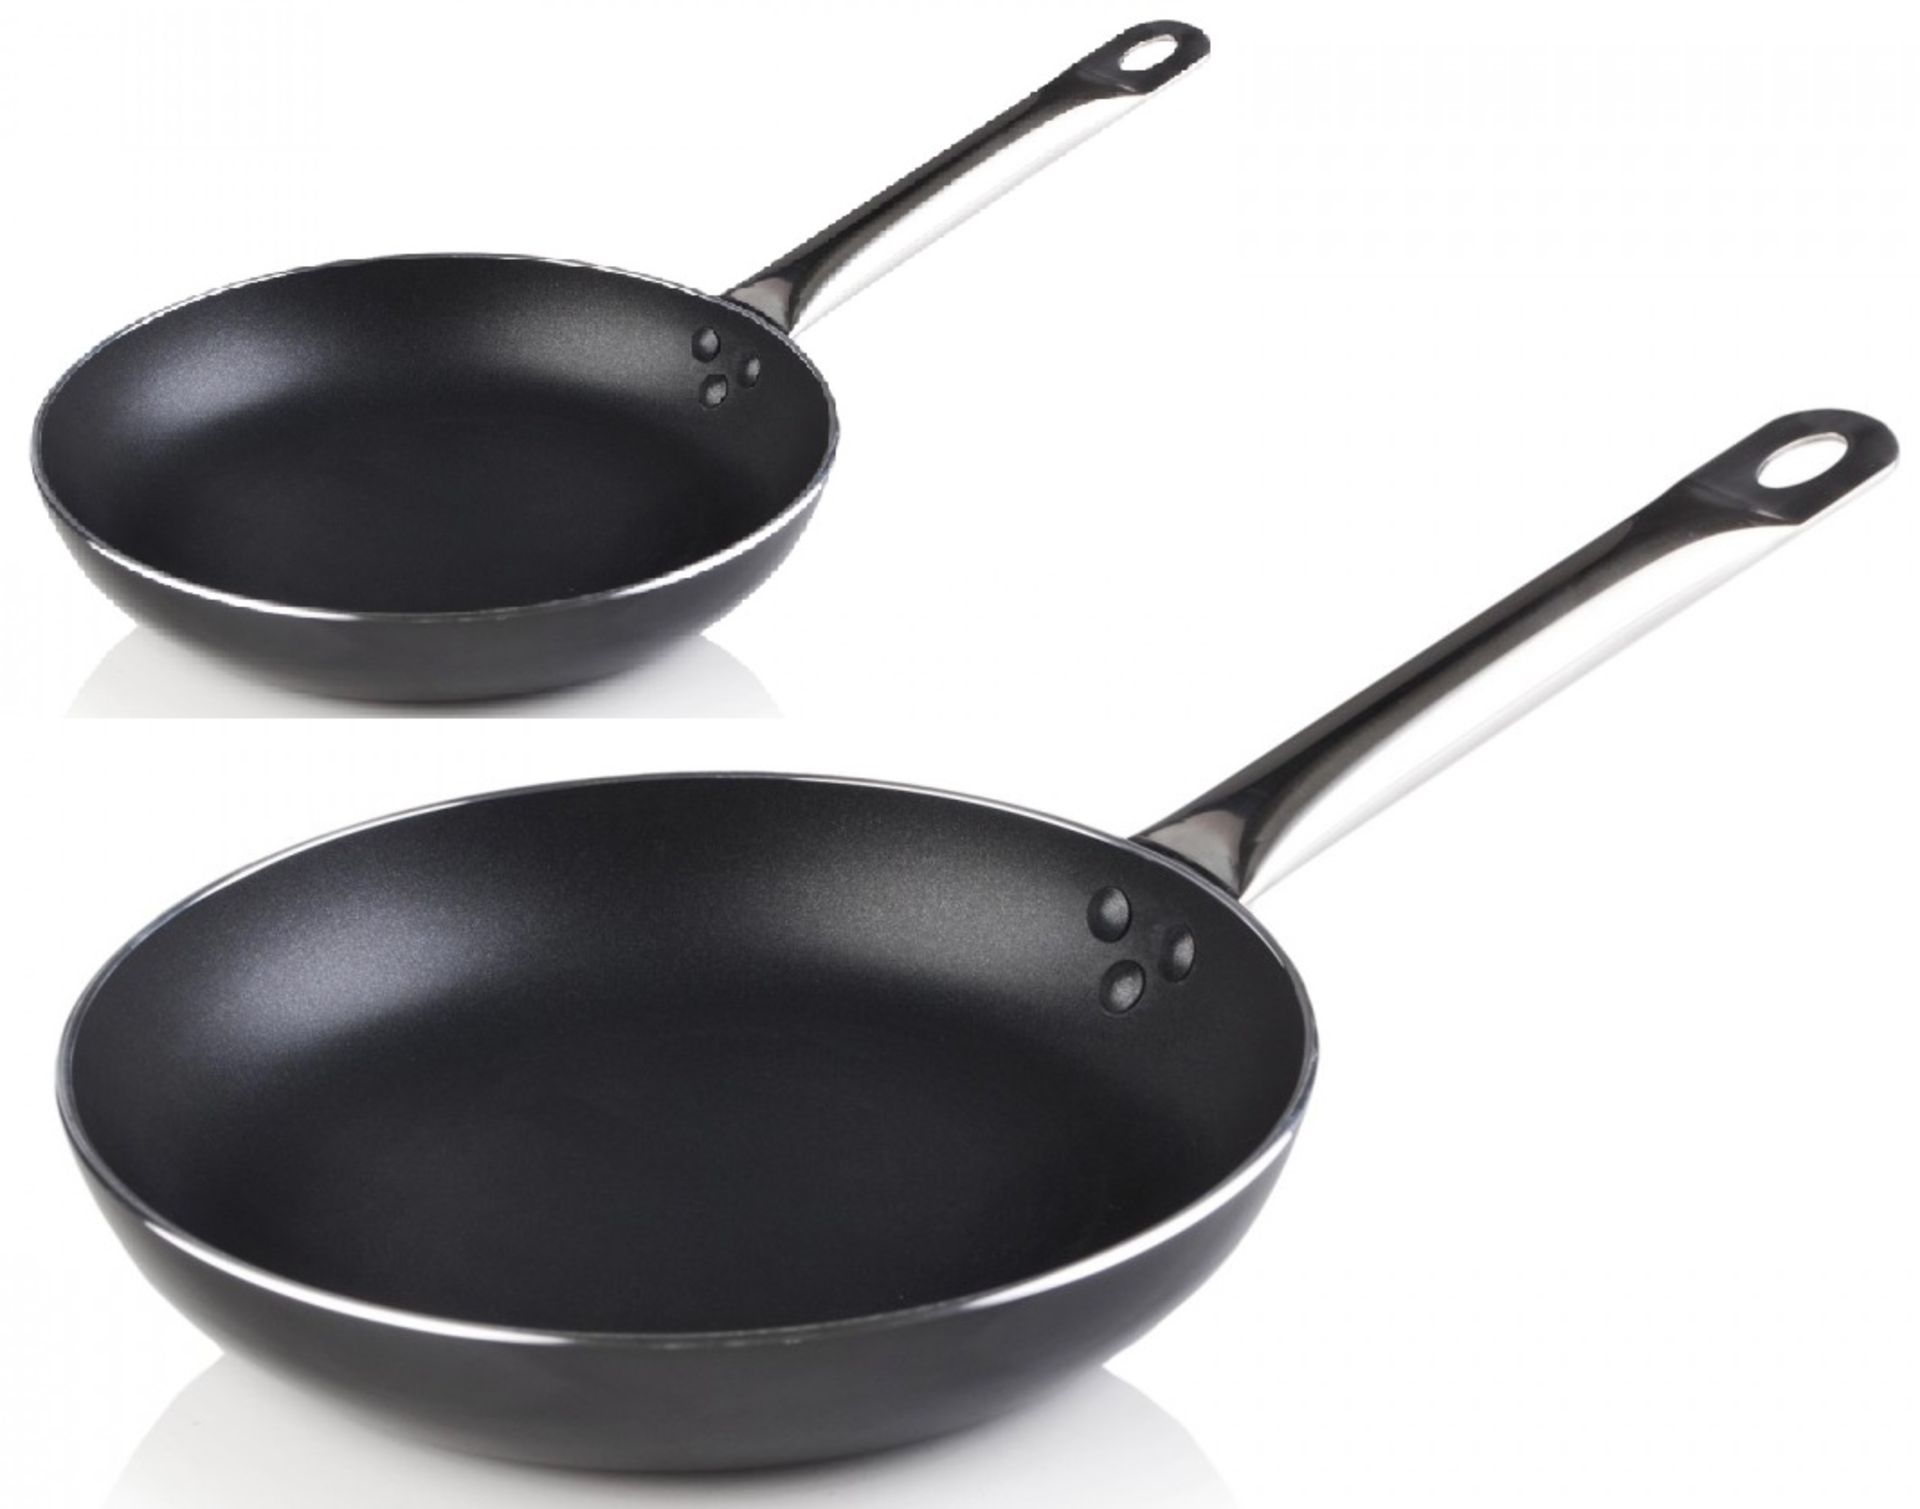 V Brand New Set Of Two Professional Quality Induction Non-Stick Saute/Frying Pans - 20 cm and 24